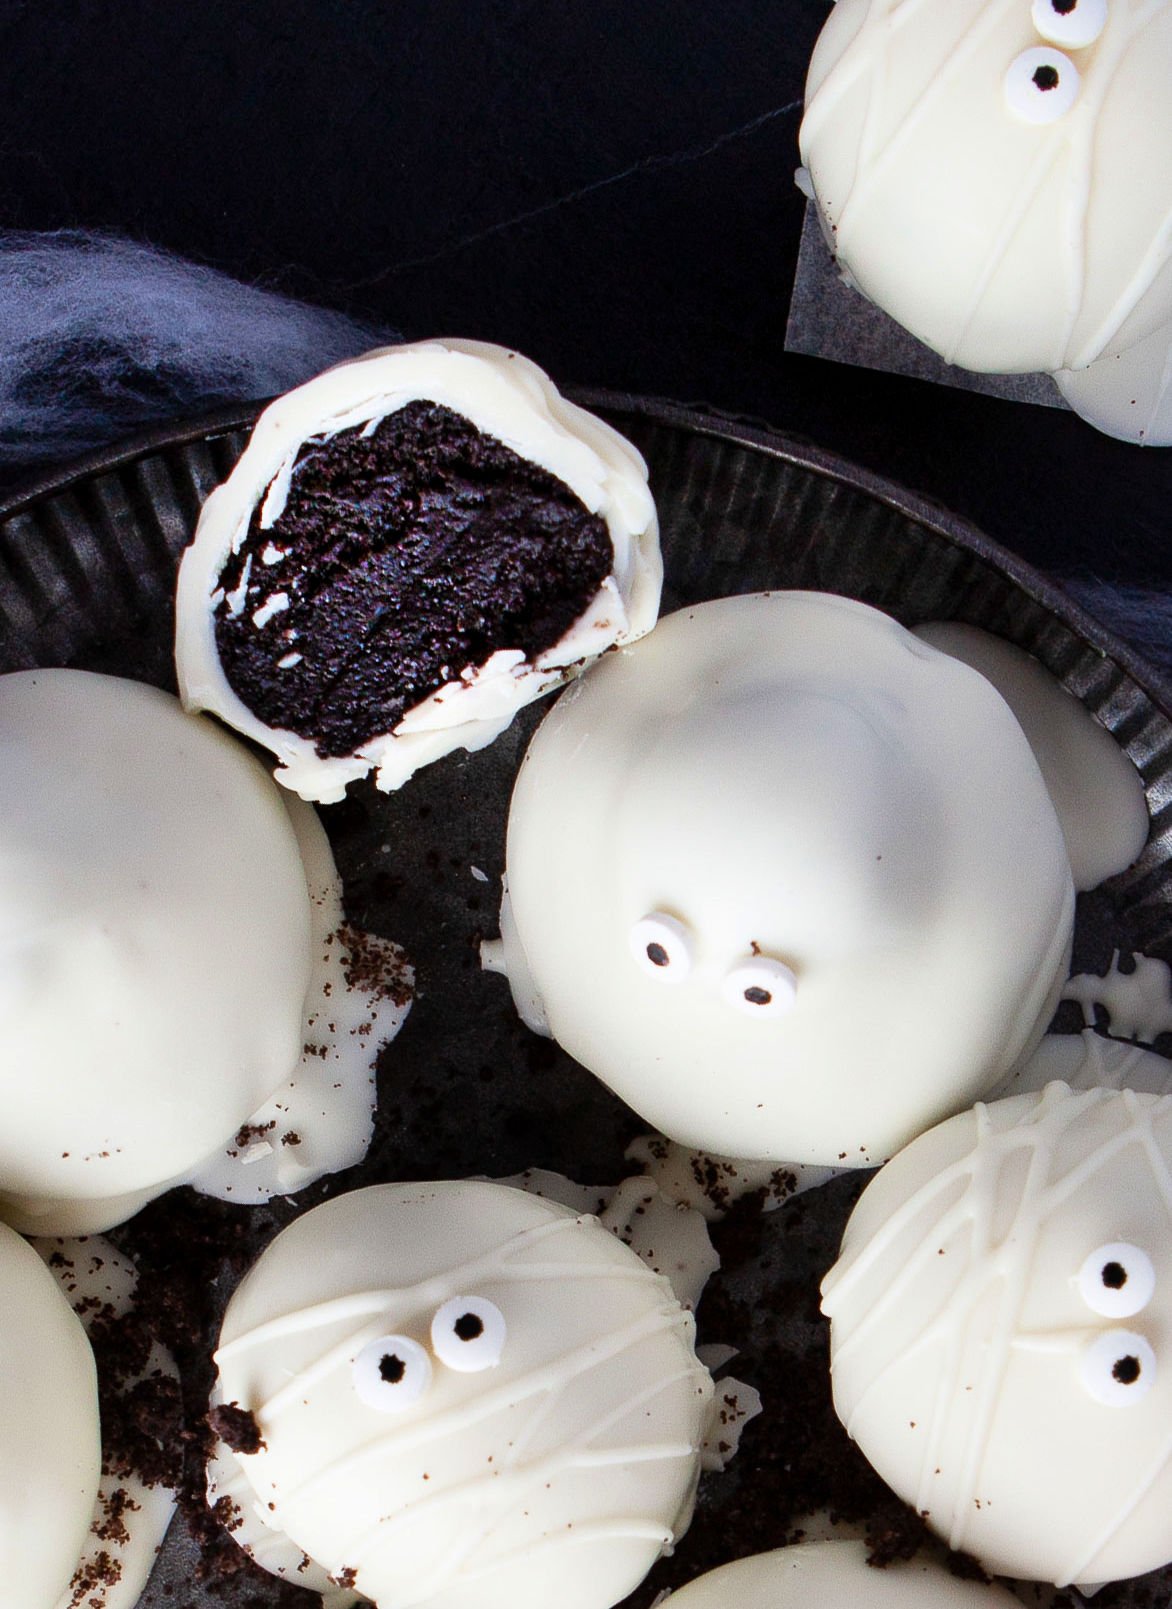 inside look at the Oreo truffle cut in half. sitting next to whole Oreo balls that are decorated and shaped as ghosts and mummies. 